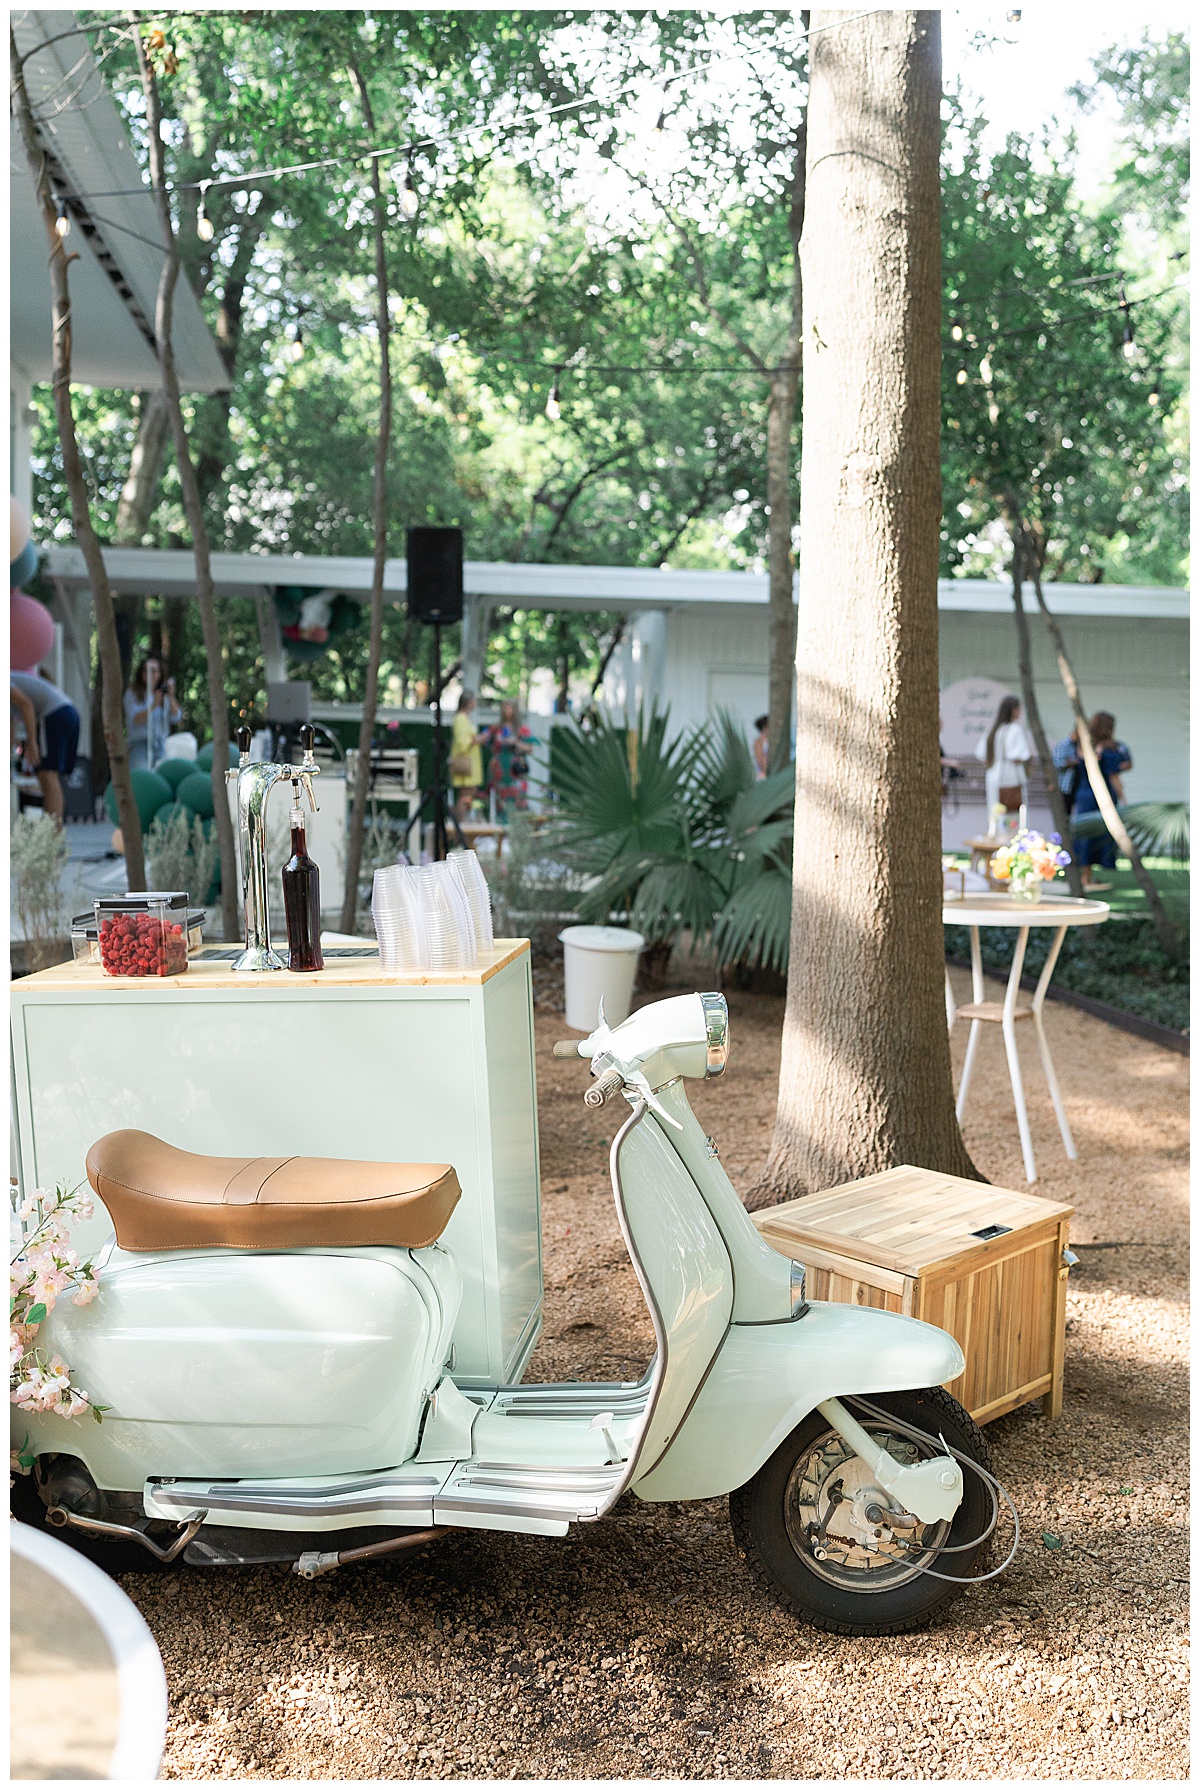 Outdoor vespa for the Open House at The Juliana